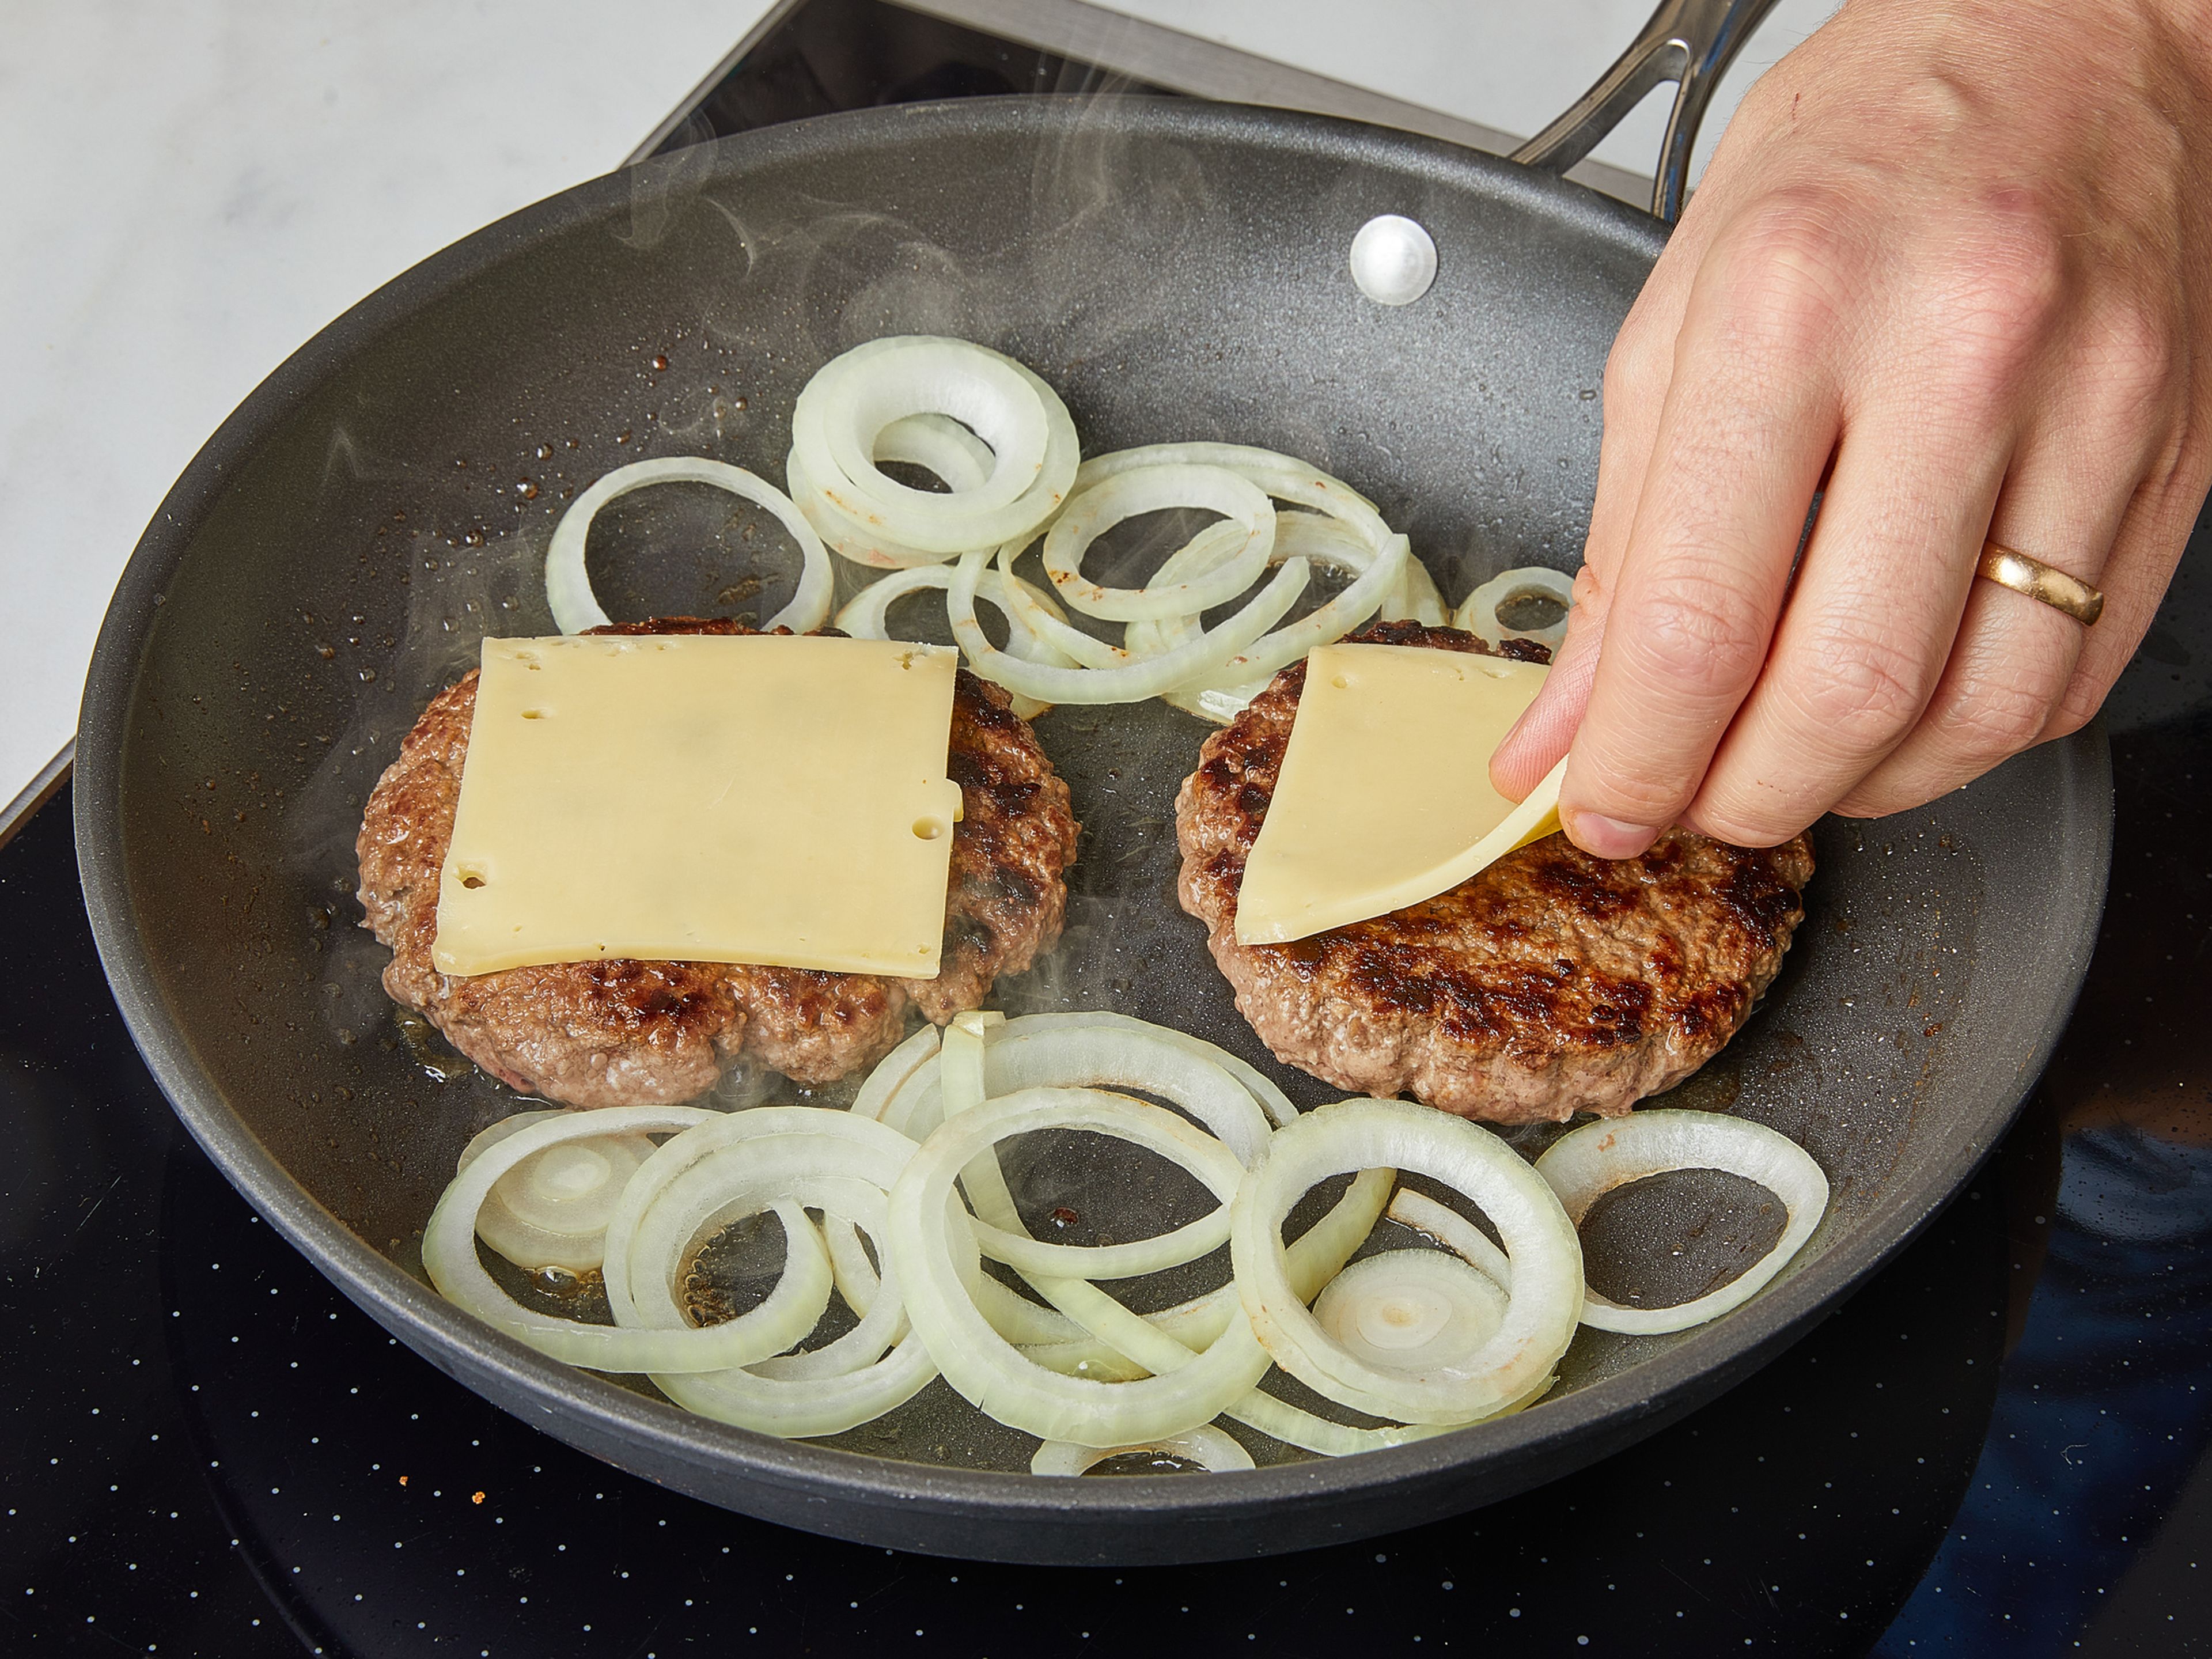 Cut the burger buns open and toast them in a large frying pan, cut-side down, for approx. 1–2 min. Remove the buns, and heat some oil in it. Add the patties and fry for approx. 4 min. on one side. Turn patties over and top with cheese. Add onion rings to the same pan, fry together with the patties for approx. another 4 min. Stir the onions occasionally.